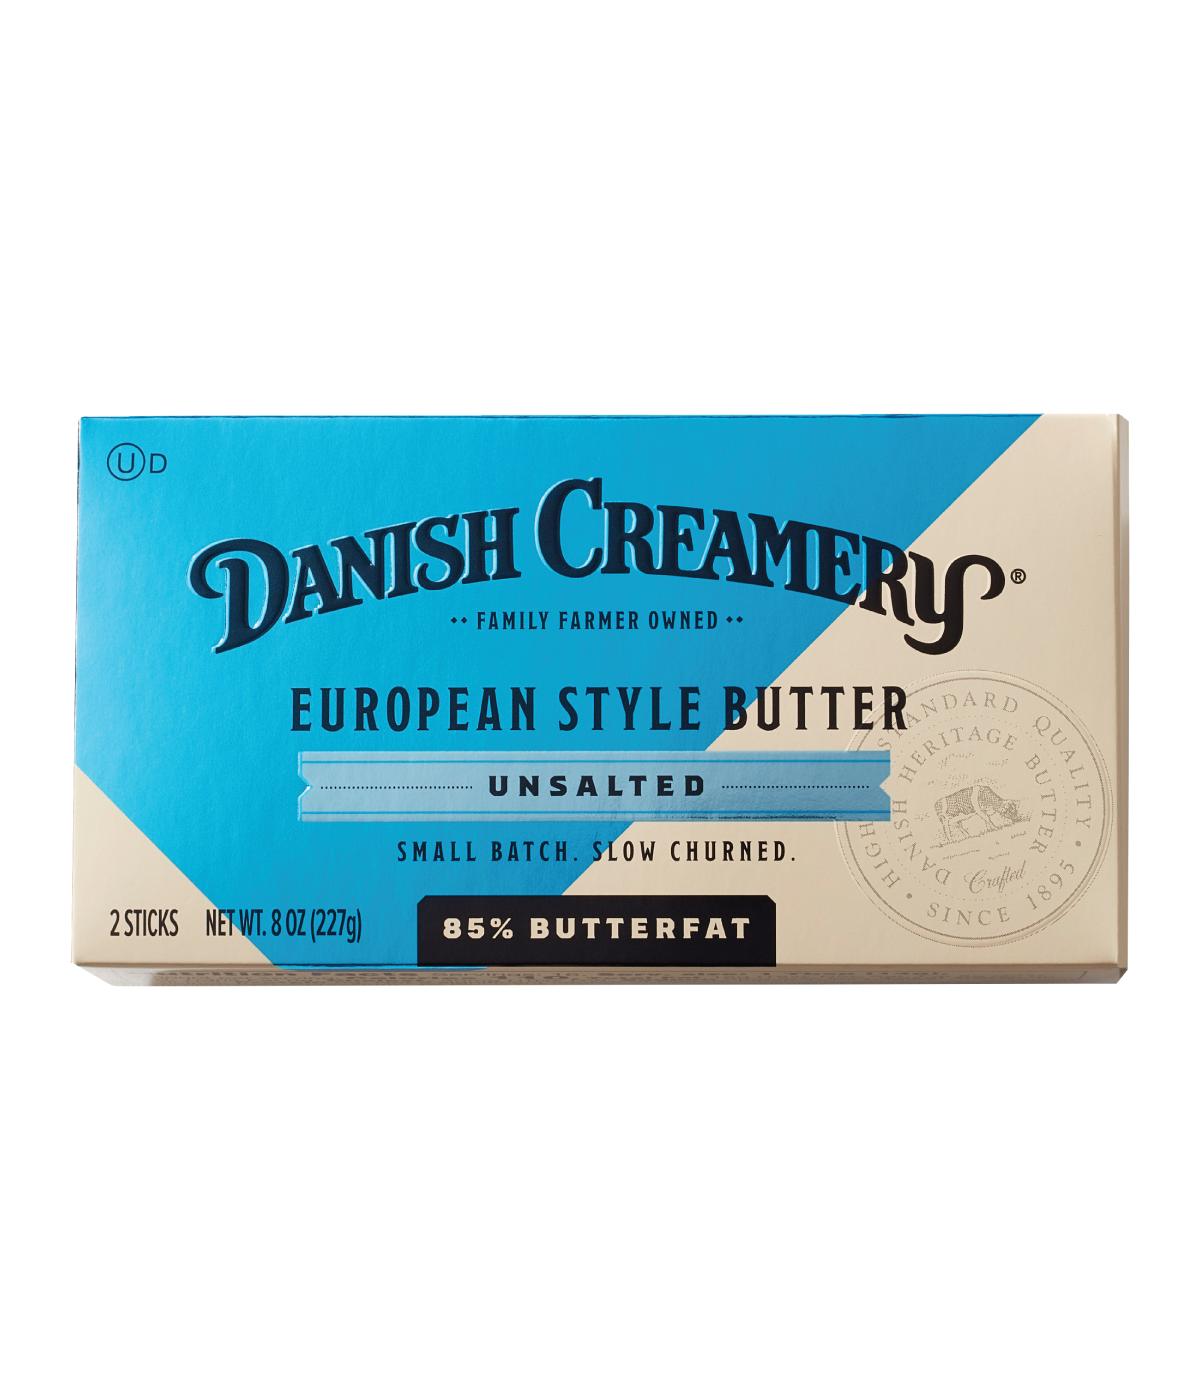 Danish Creamery Unsalted European Style Butter; image 1 of 4